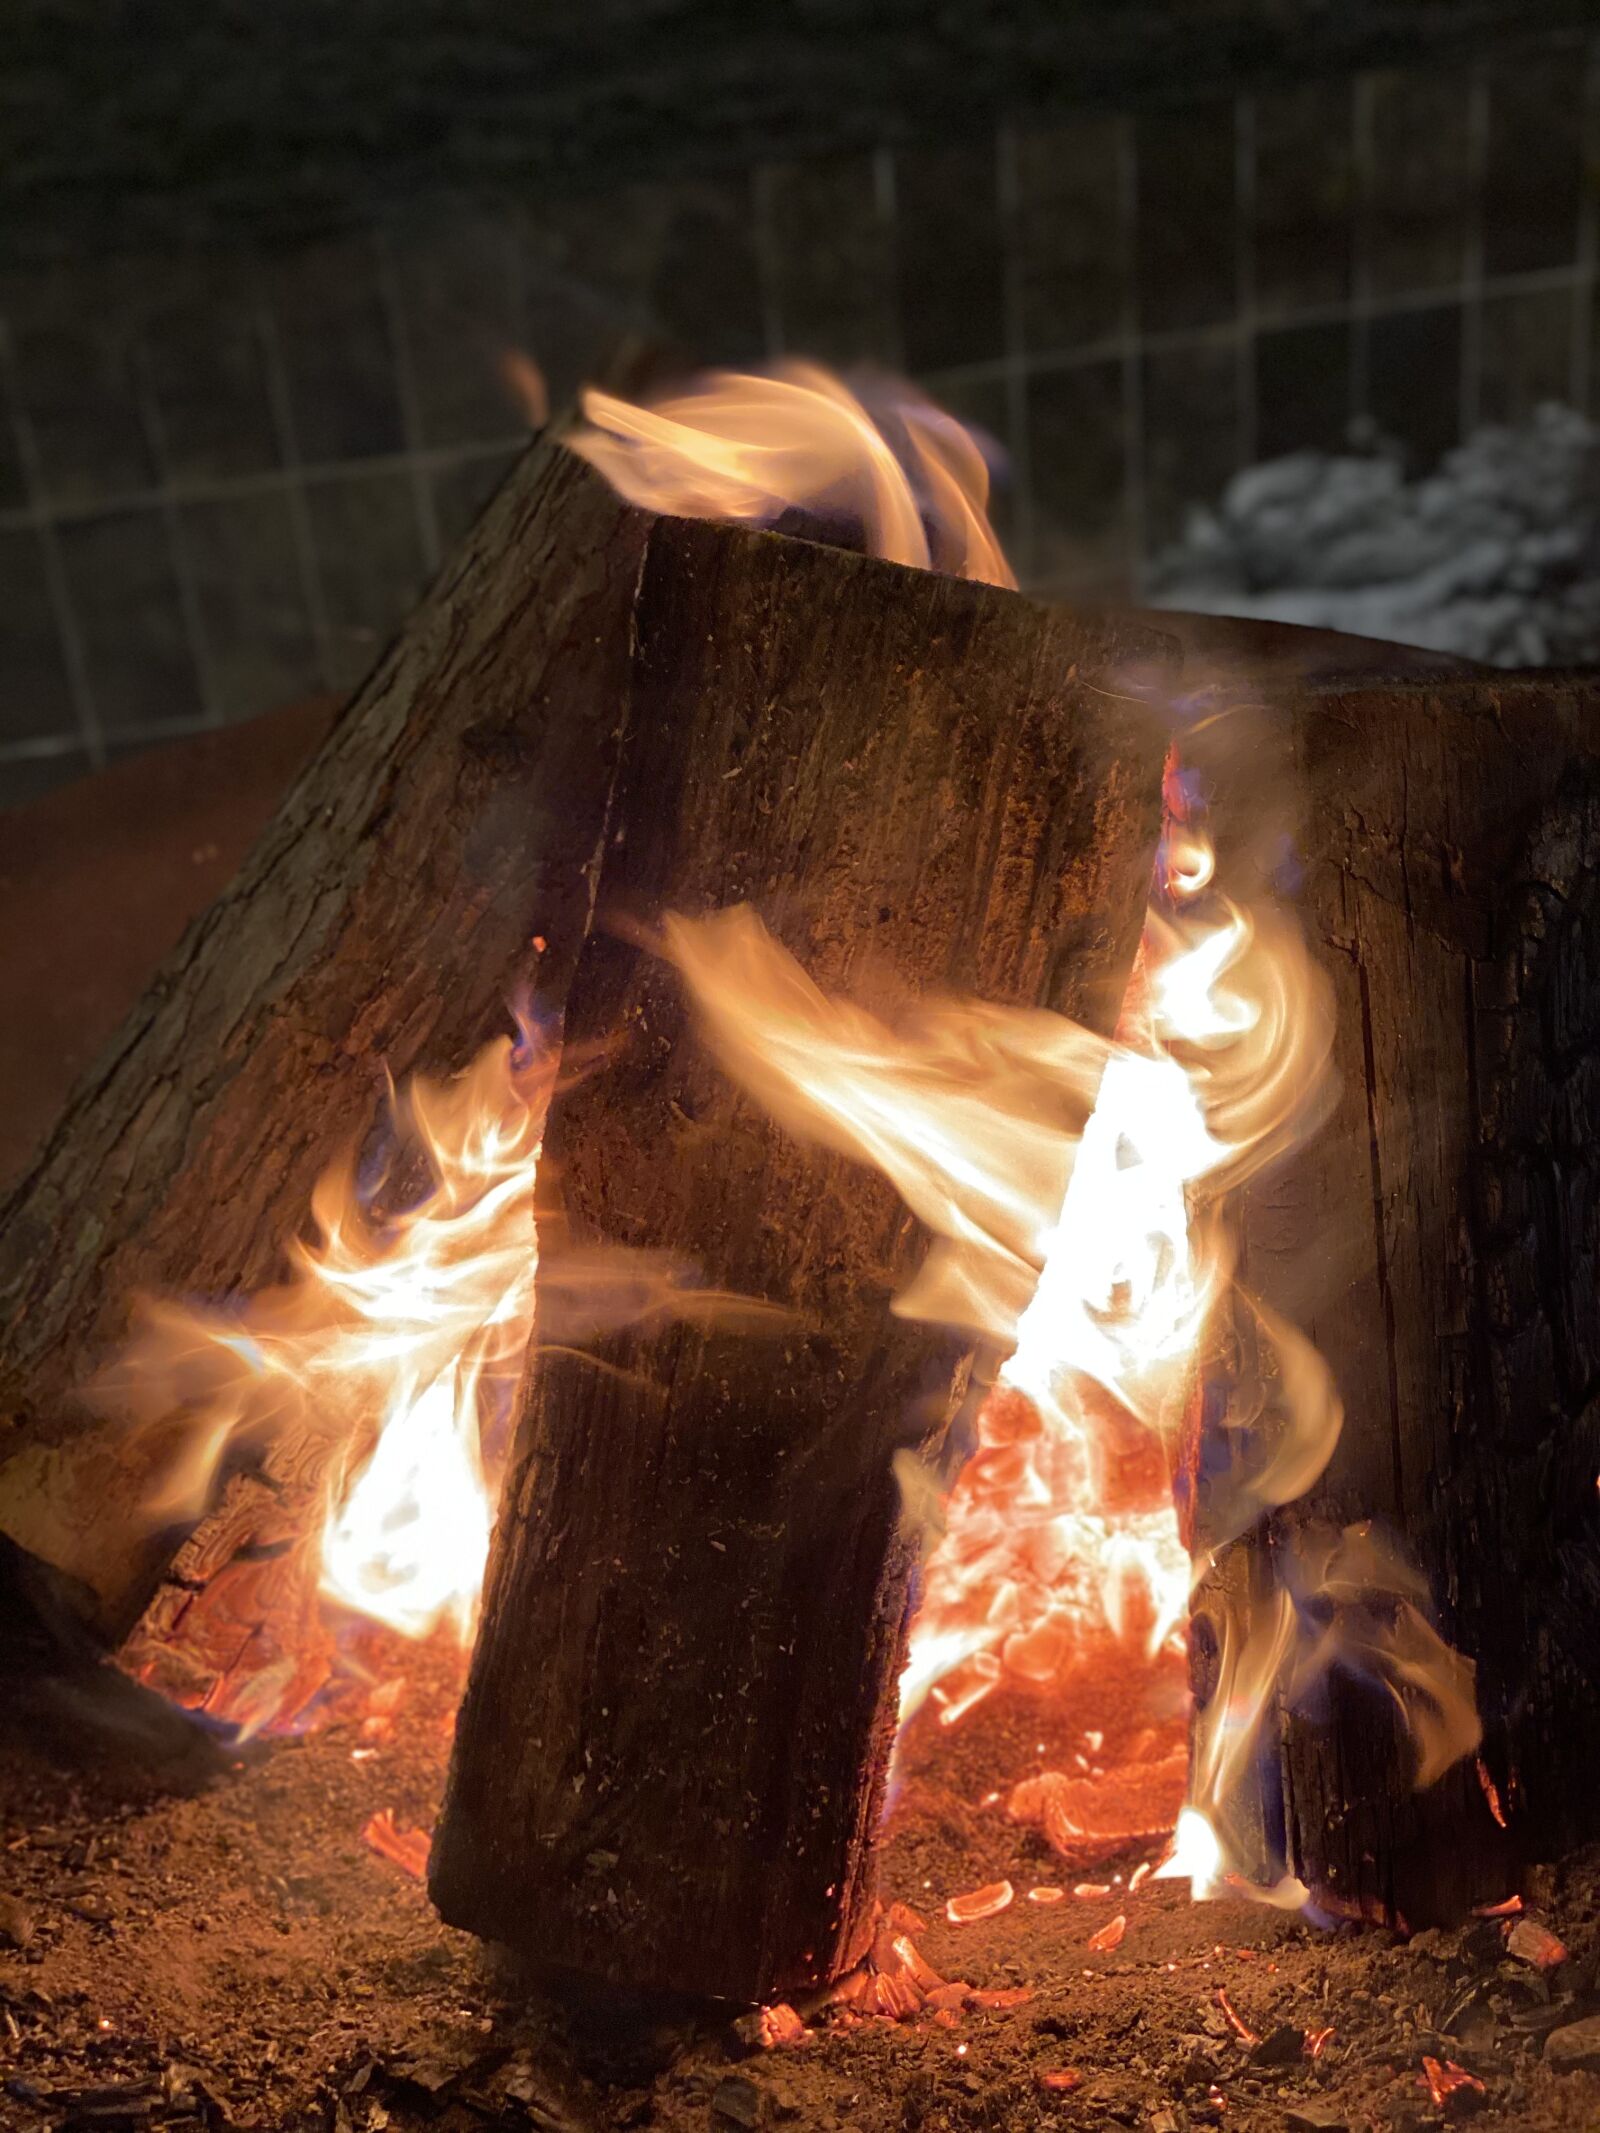 iPhone 11 Pro back dual camera 6mm f/2 sample photo. Fire, wood, flame photography